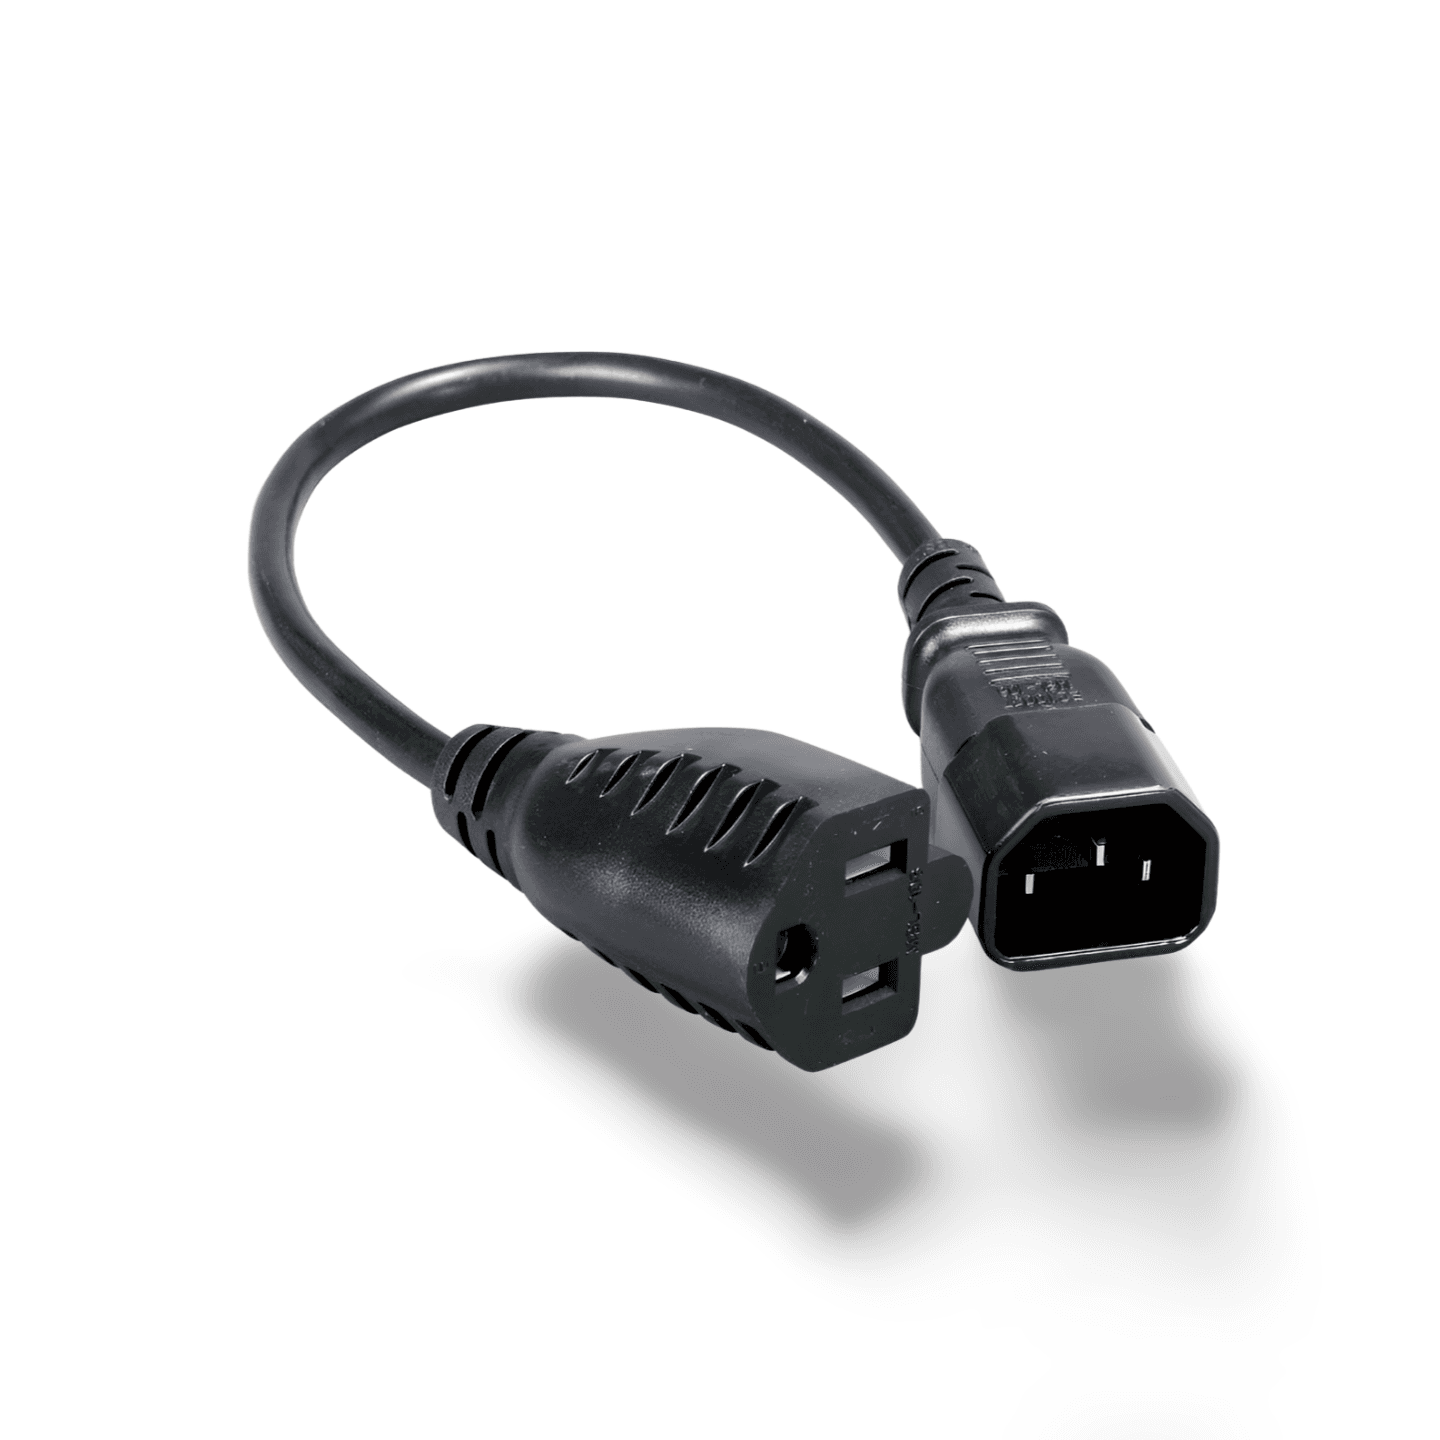 1ft IEC320 C14 Male To 3 Prong NEMA 5 15 Outlet Female Power Cord Adapter black